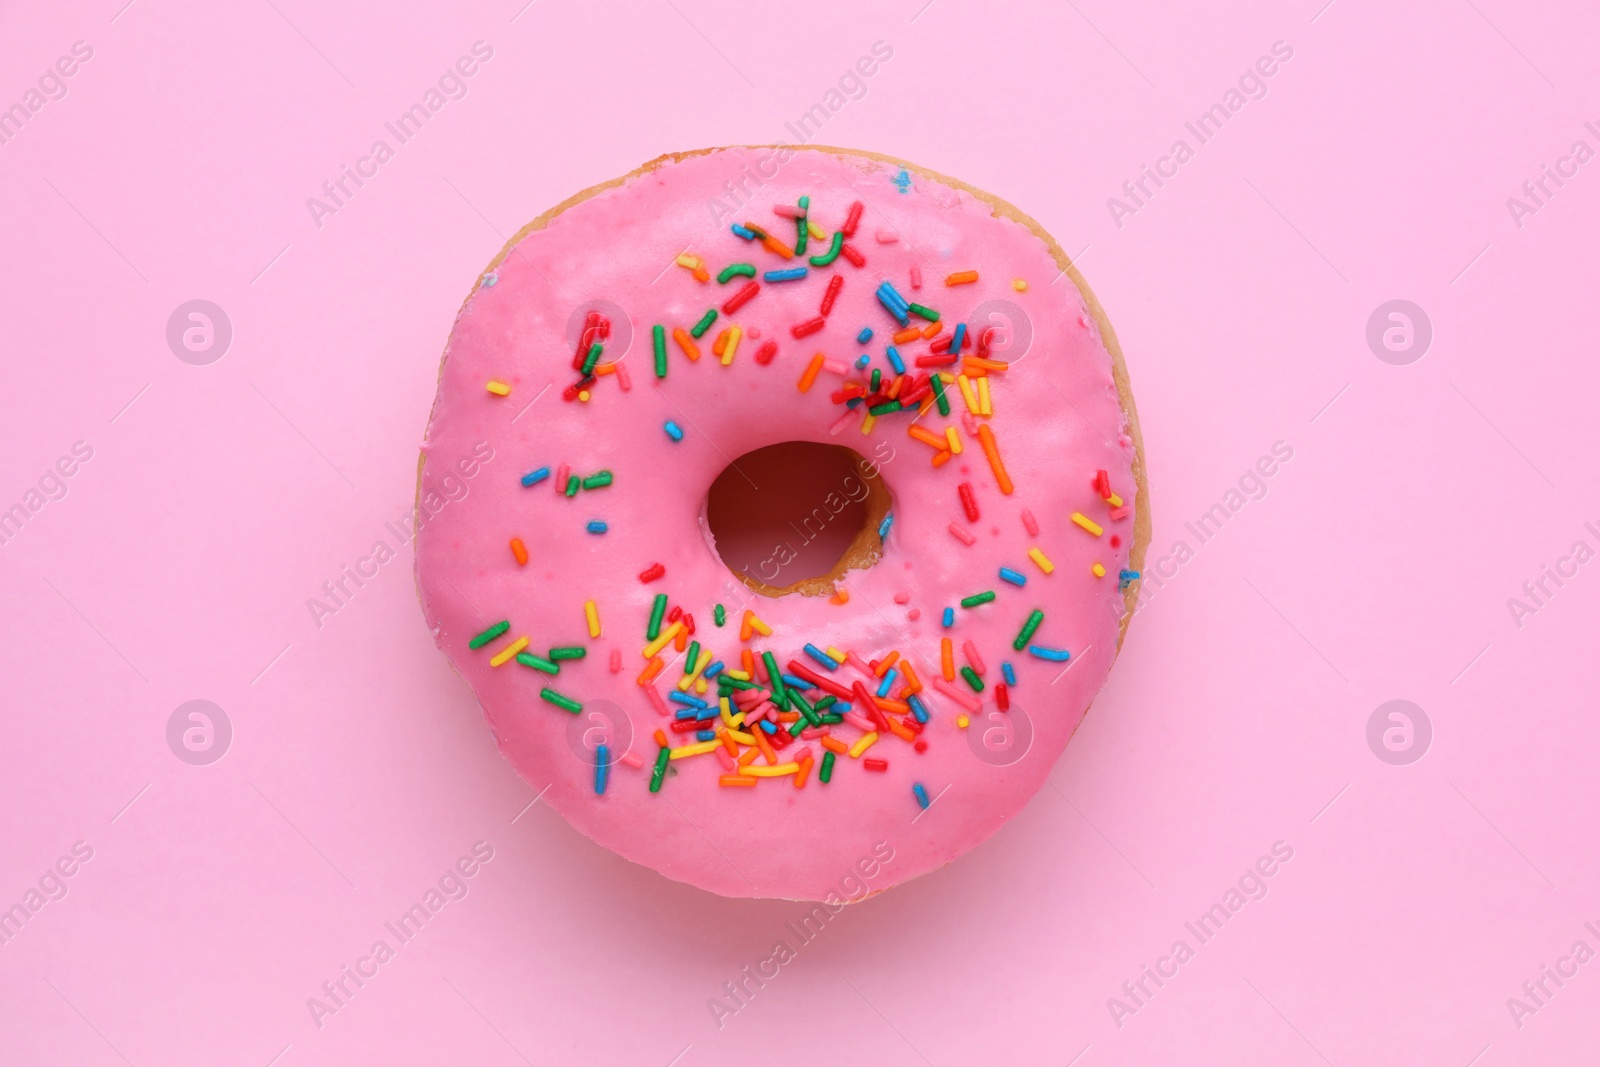 Photo of Tasty glazed donut decorated with sprinkles on pink background, top view